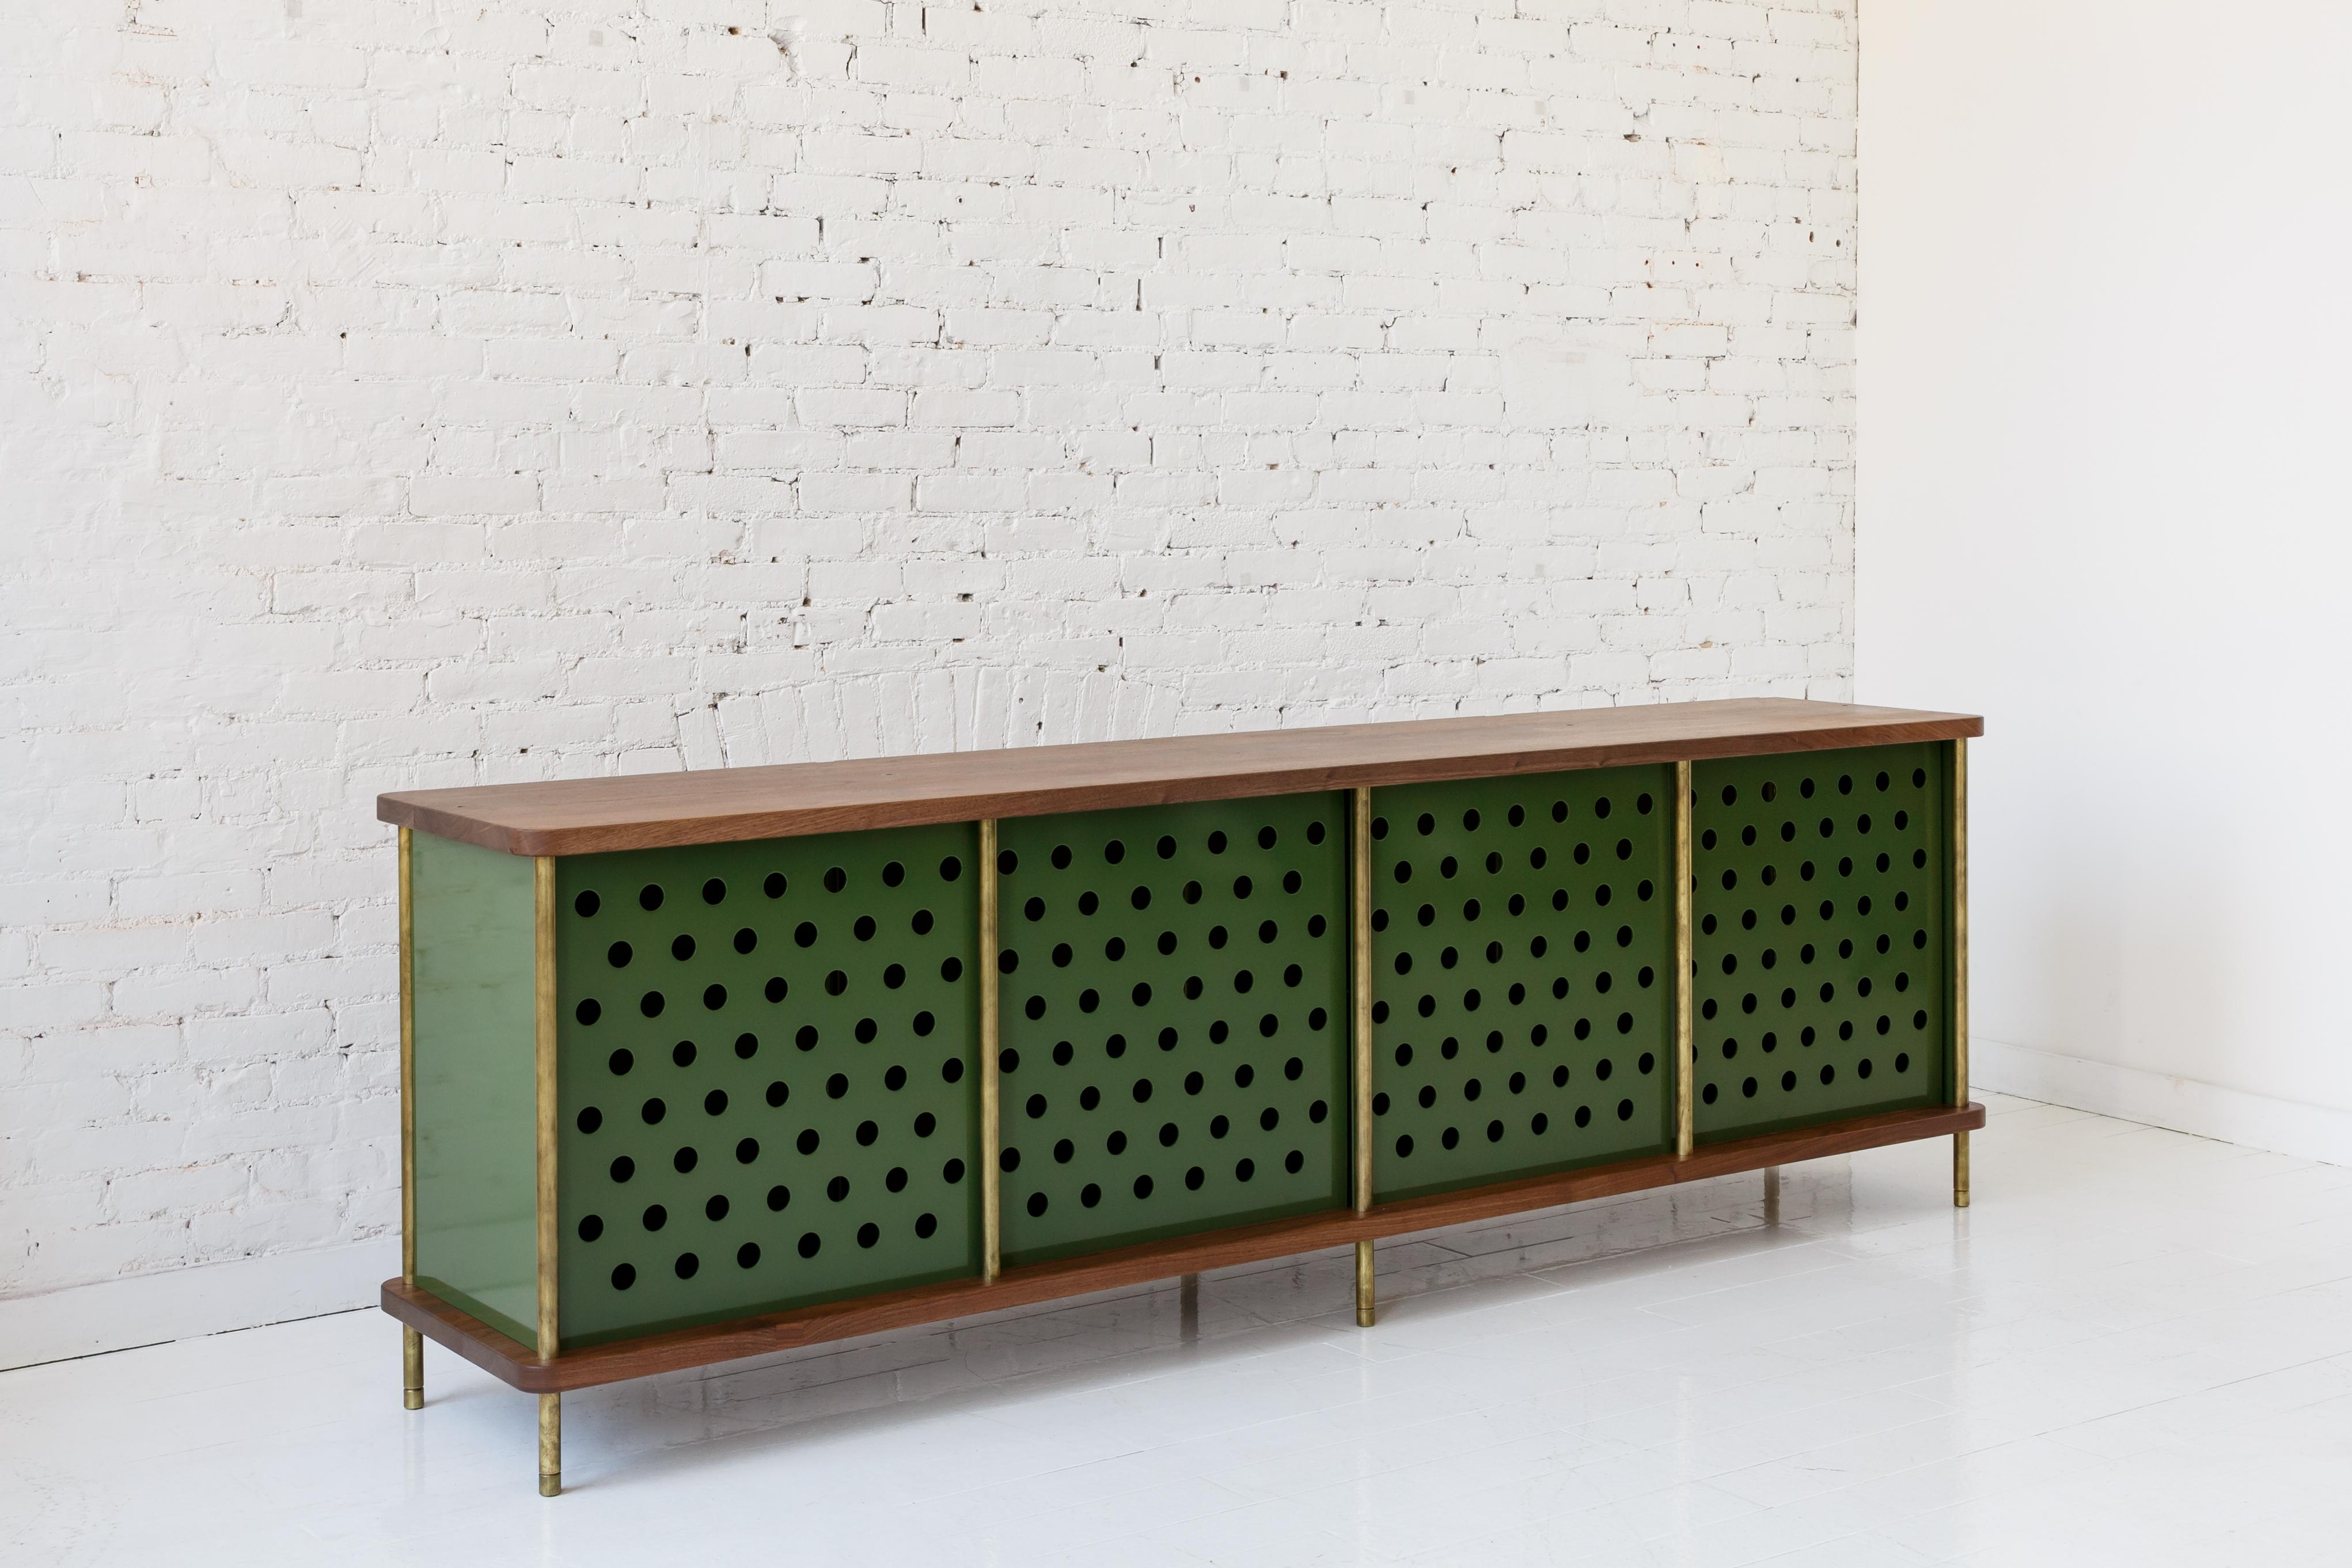 Powder-Coated 4 Door Strata Credenza with No Top Shelves in Walnut and Brass by Fort Standard